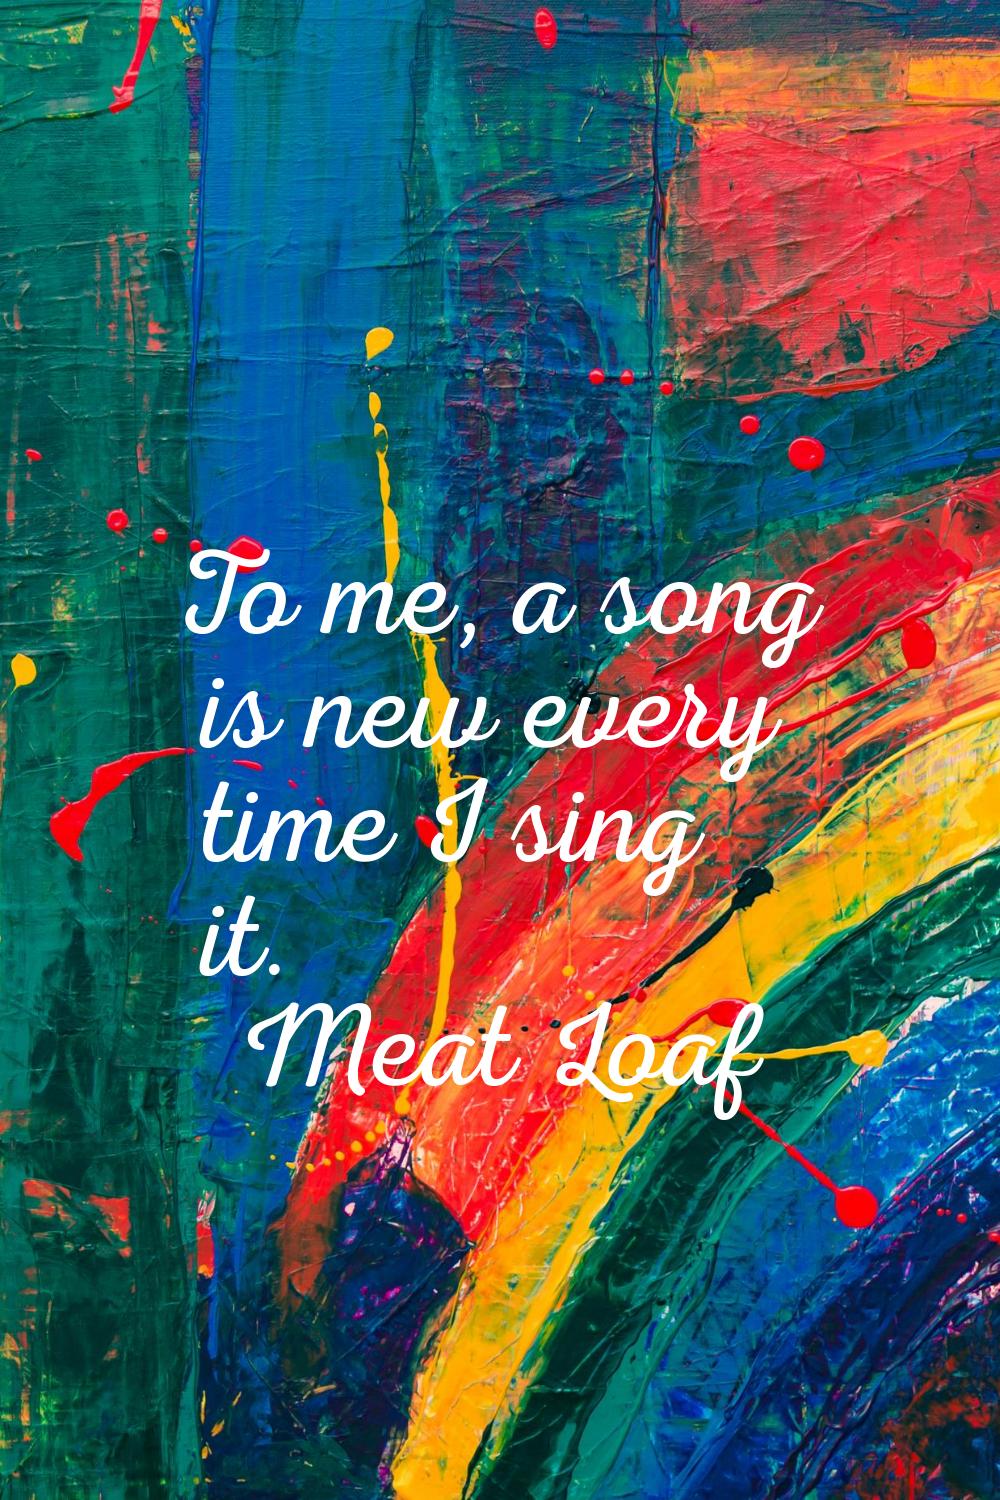 To me, a song is new every time I sing it.